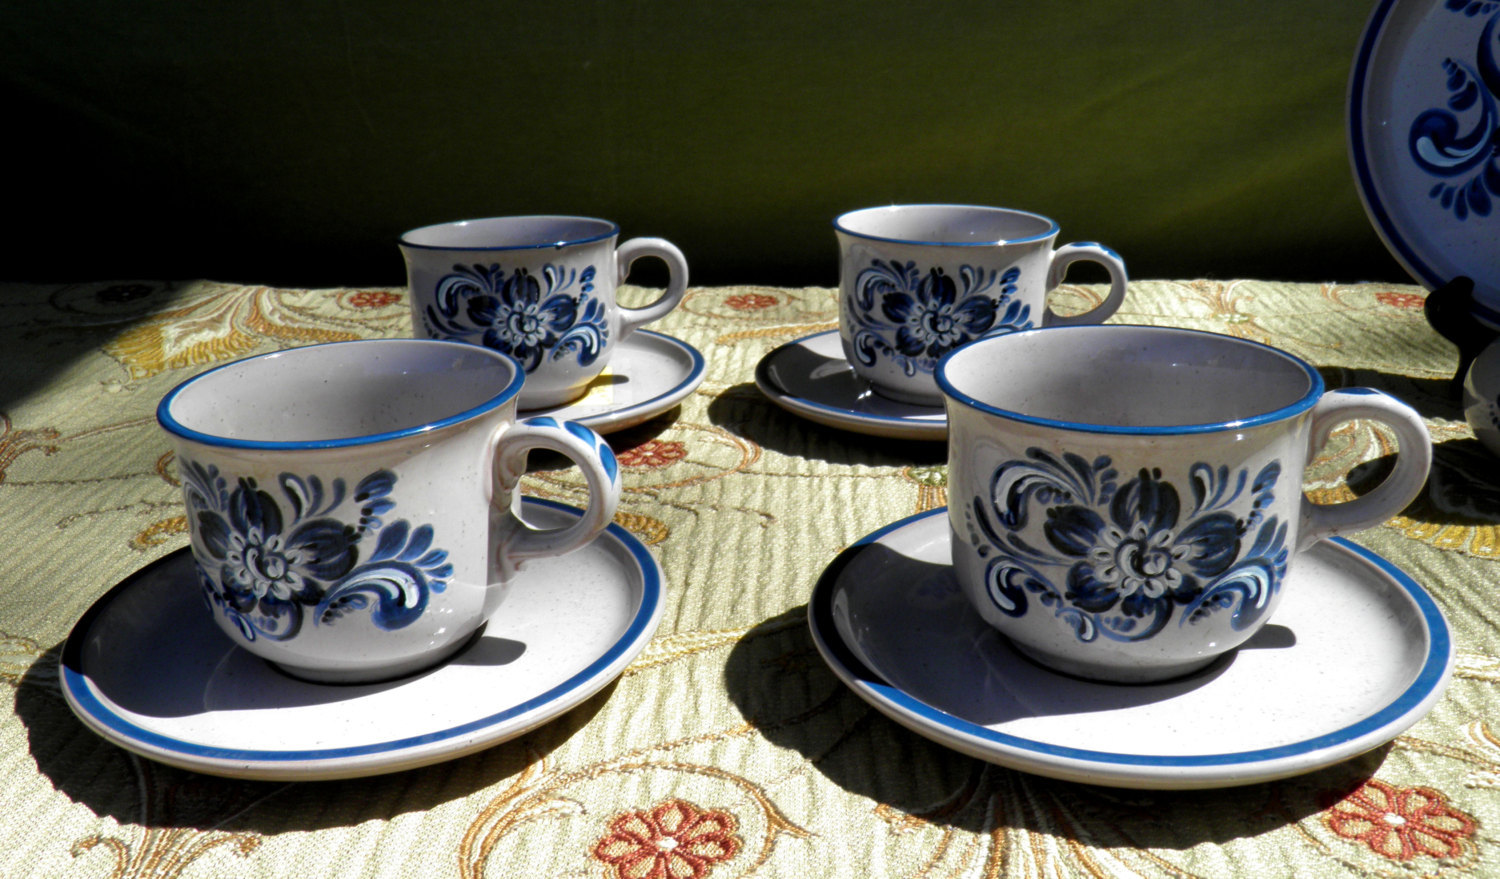 Bavarian Style Red Ware Coffee Cups and Saucers - with Floral Motif - Ceramic Re - $60.00